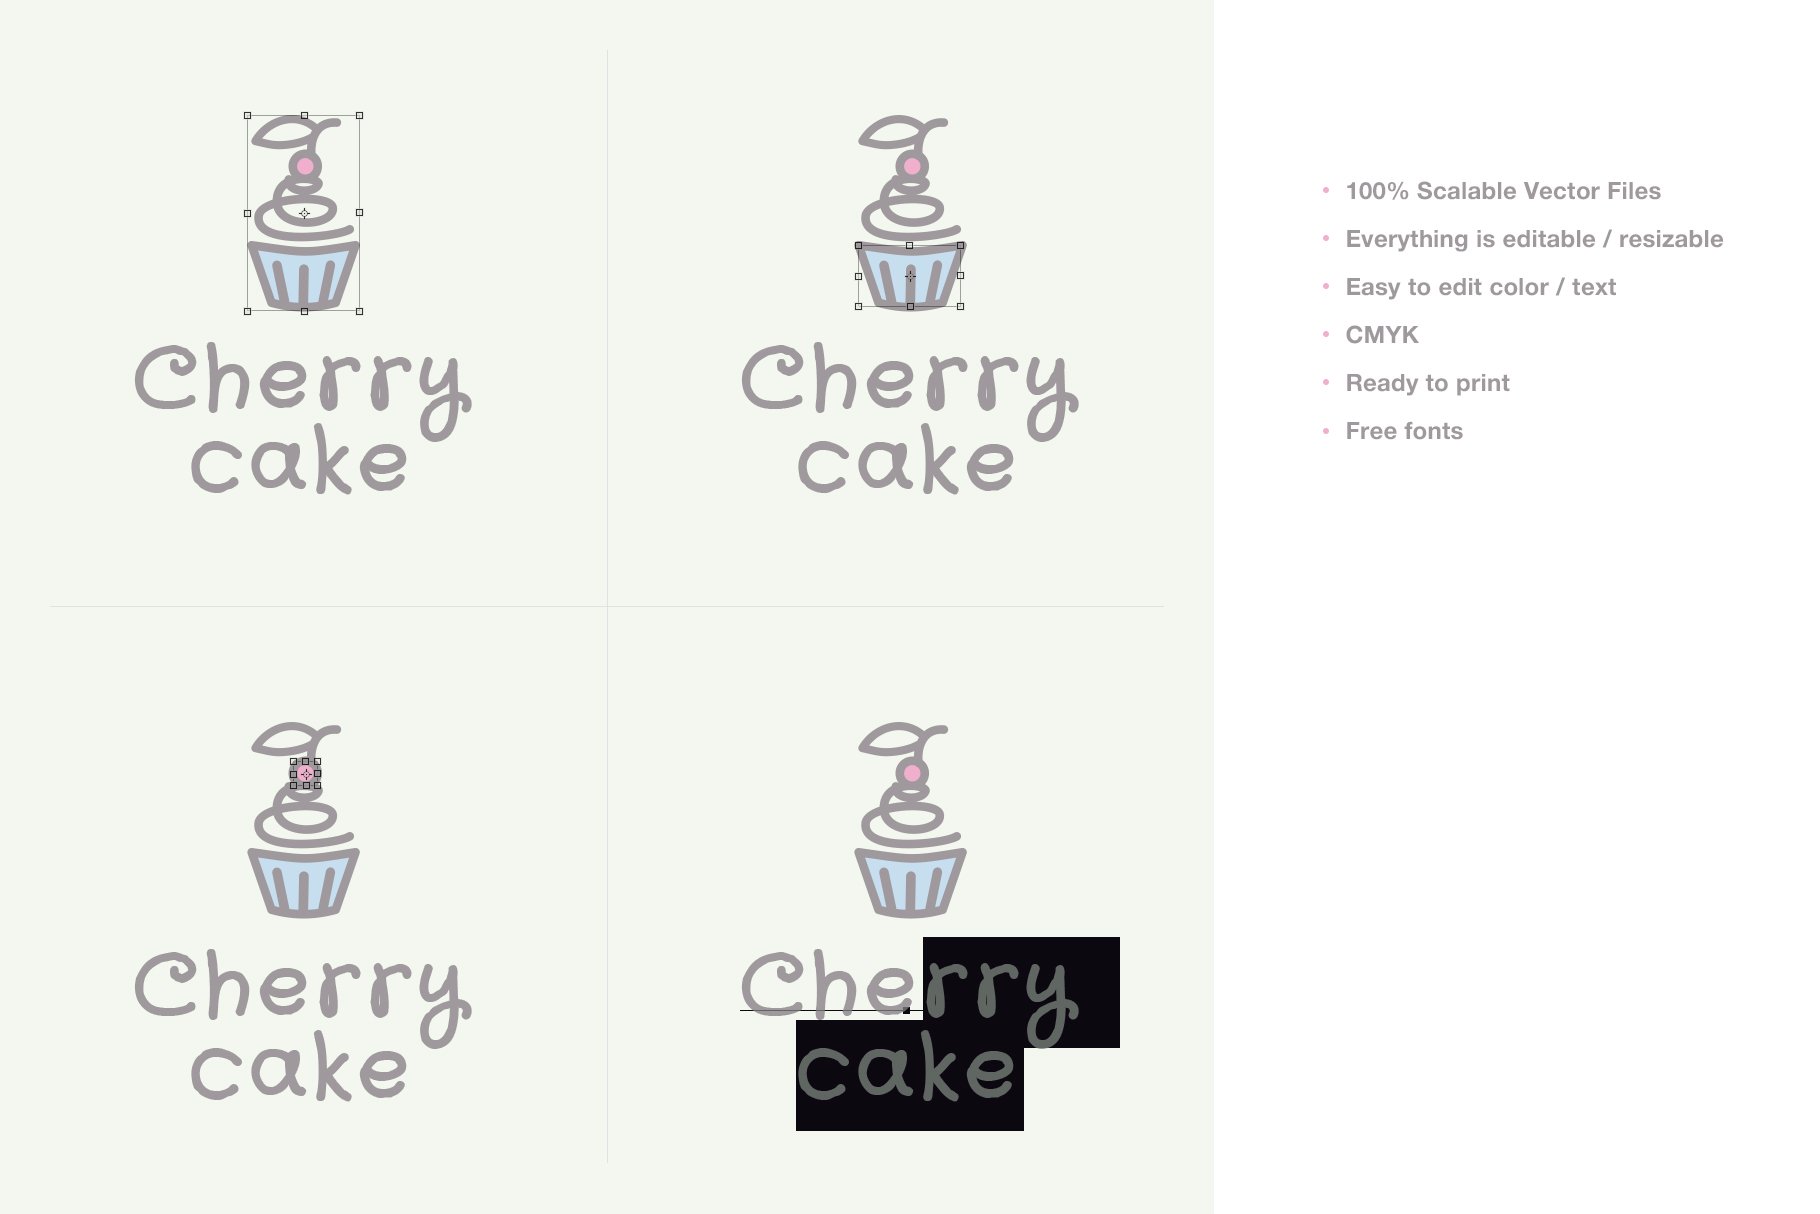 Cherry cake preview image.